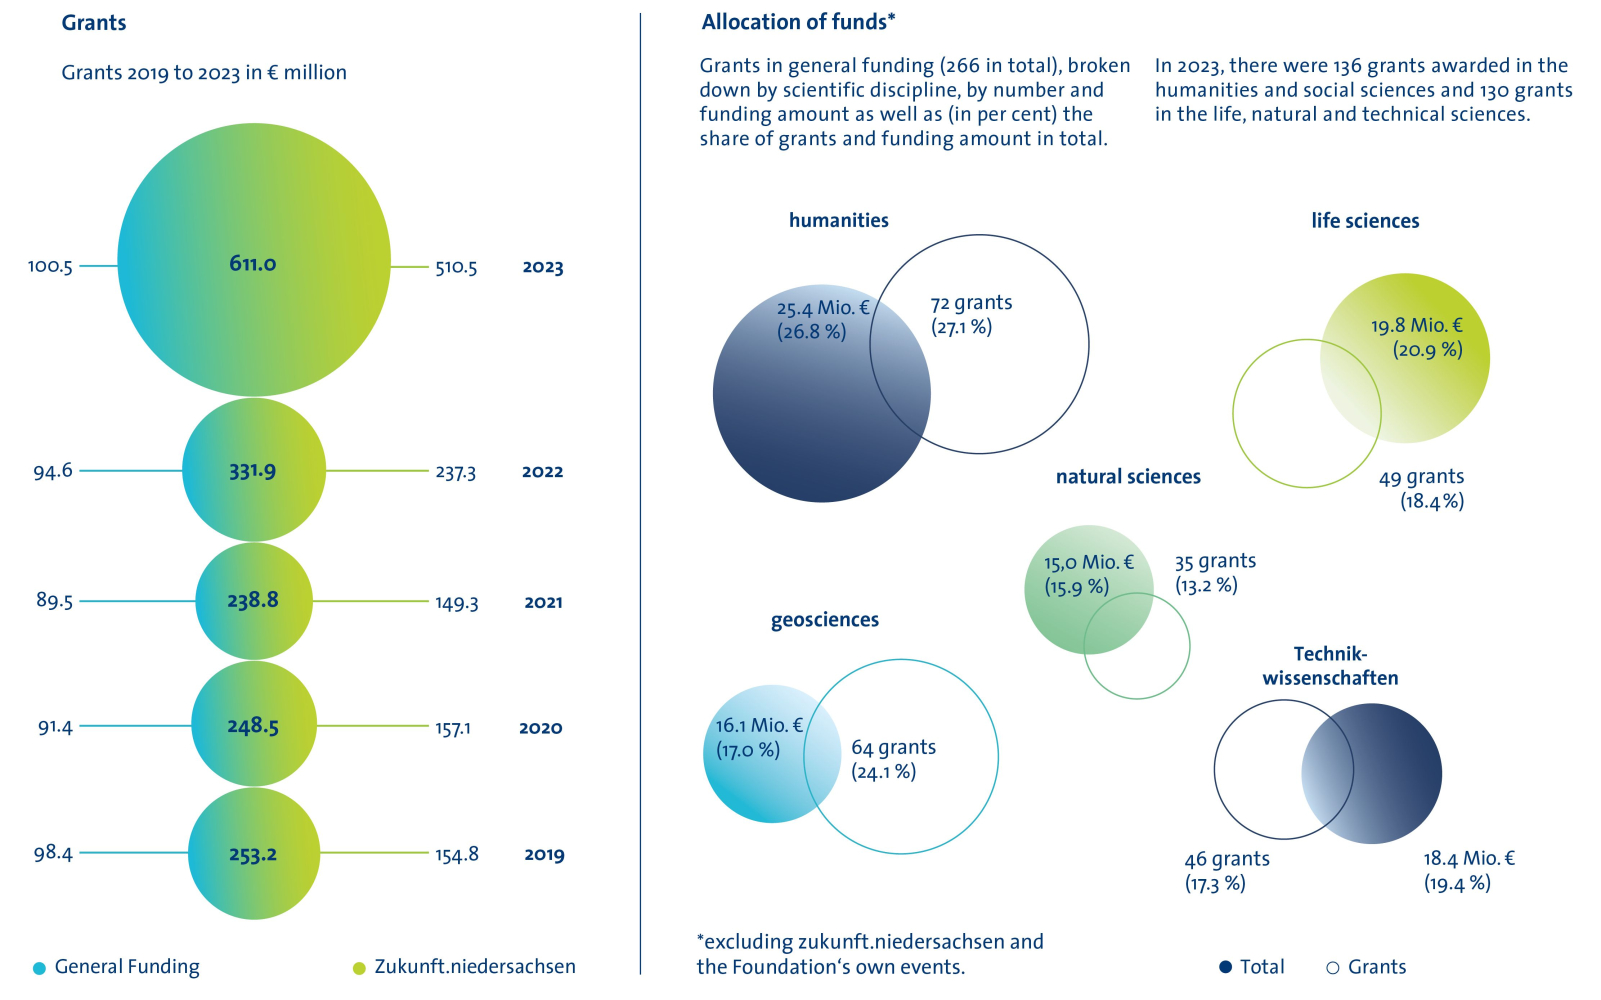 annual report: diagram "grants" and "allocation of funds"